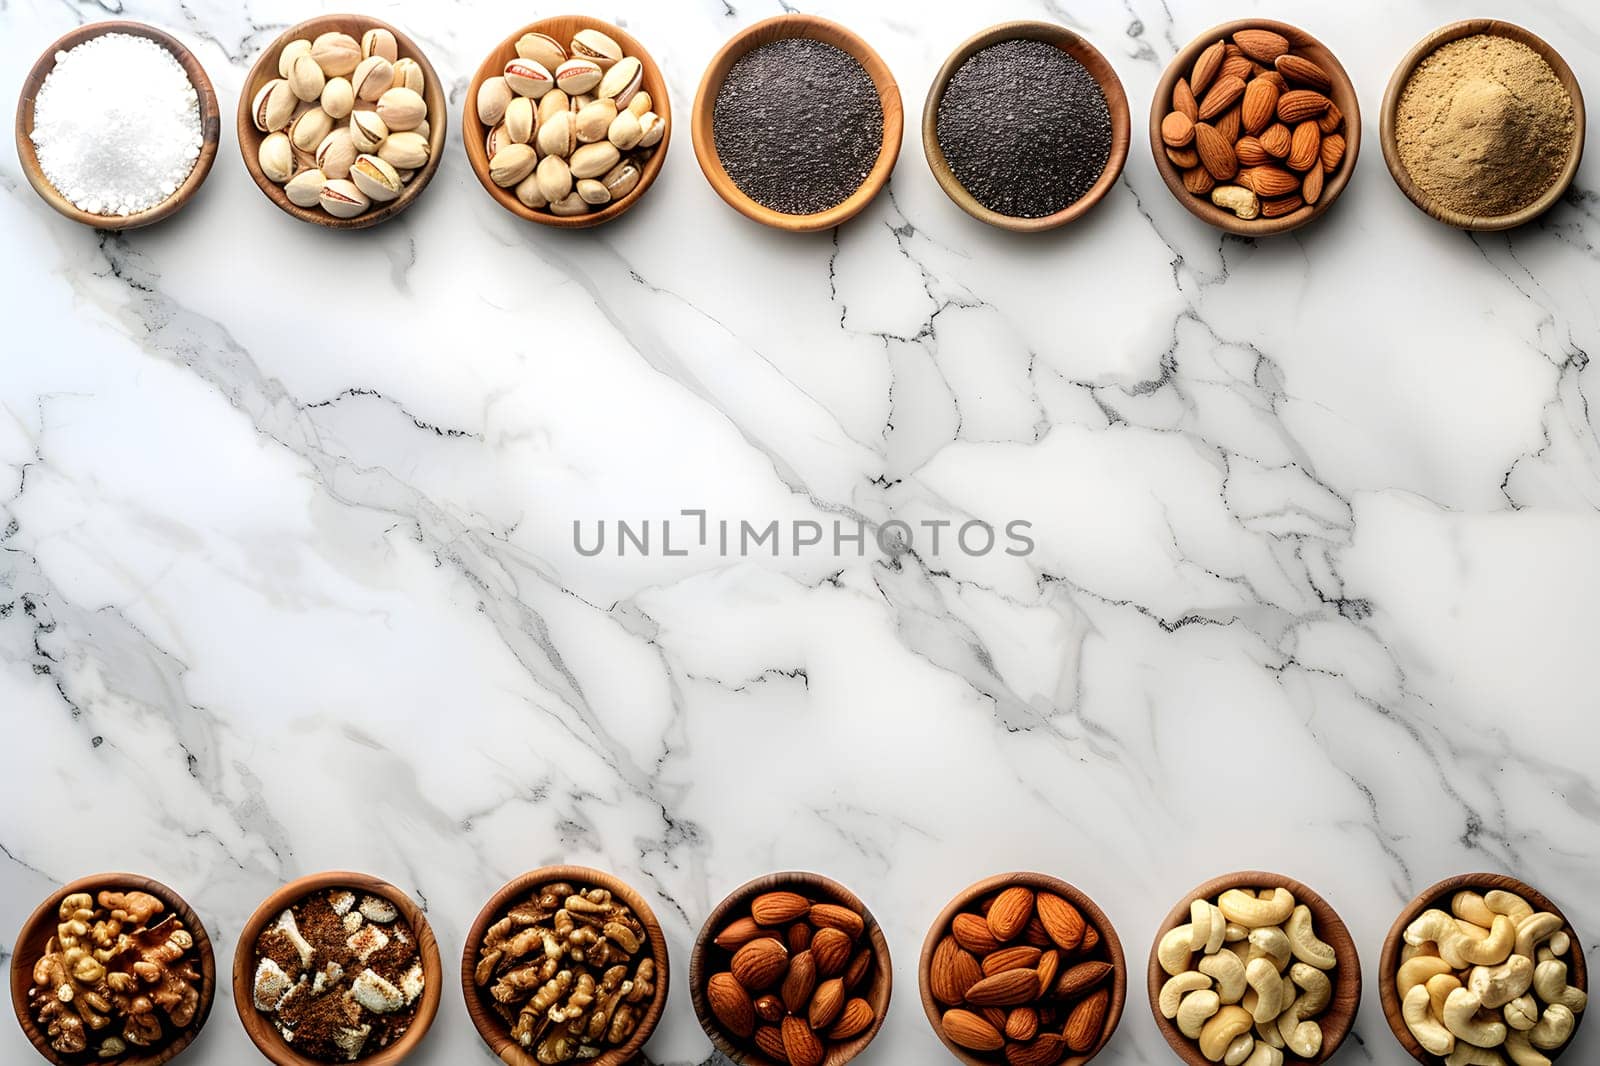 Assorted nuts and spices in wooden bowls on a marble surface by Nadtochiy